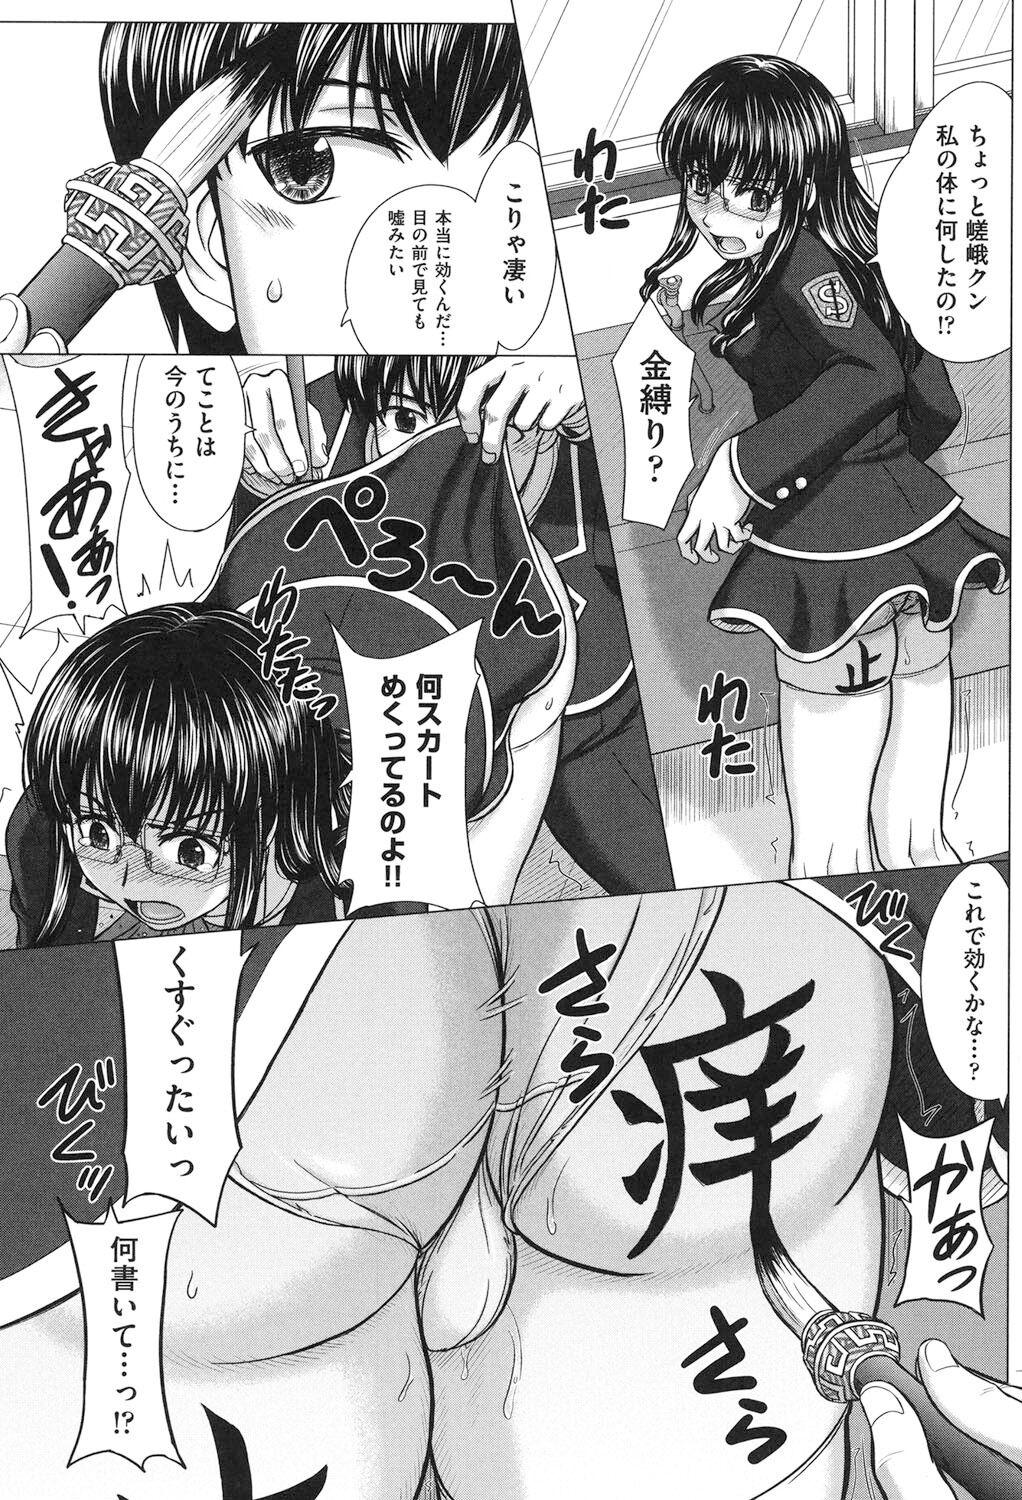 Houkago Kouhai Note - After School Mating Notes 127